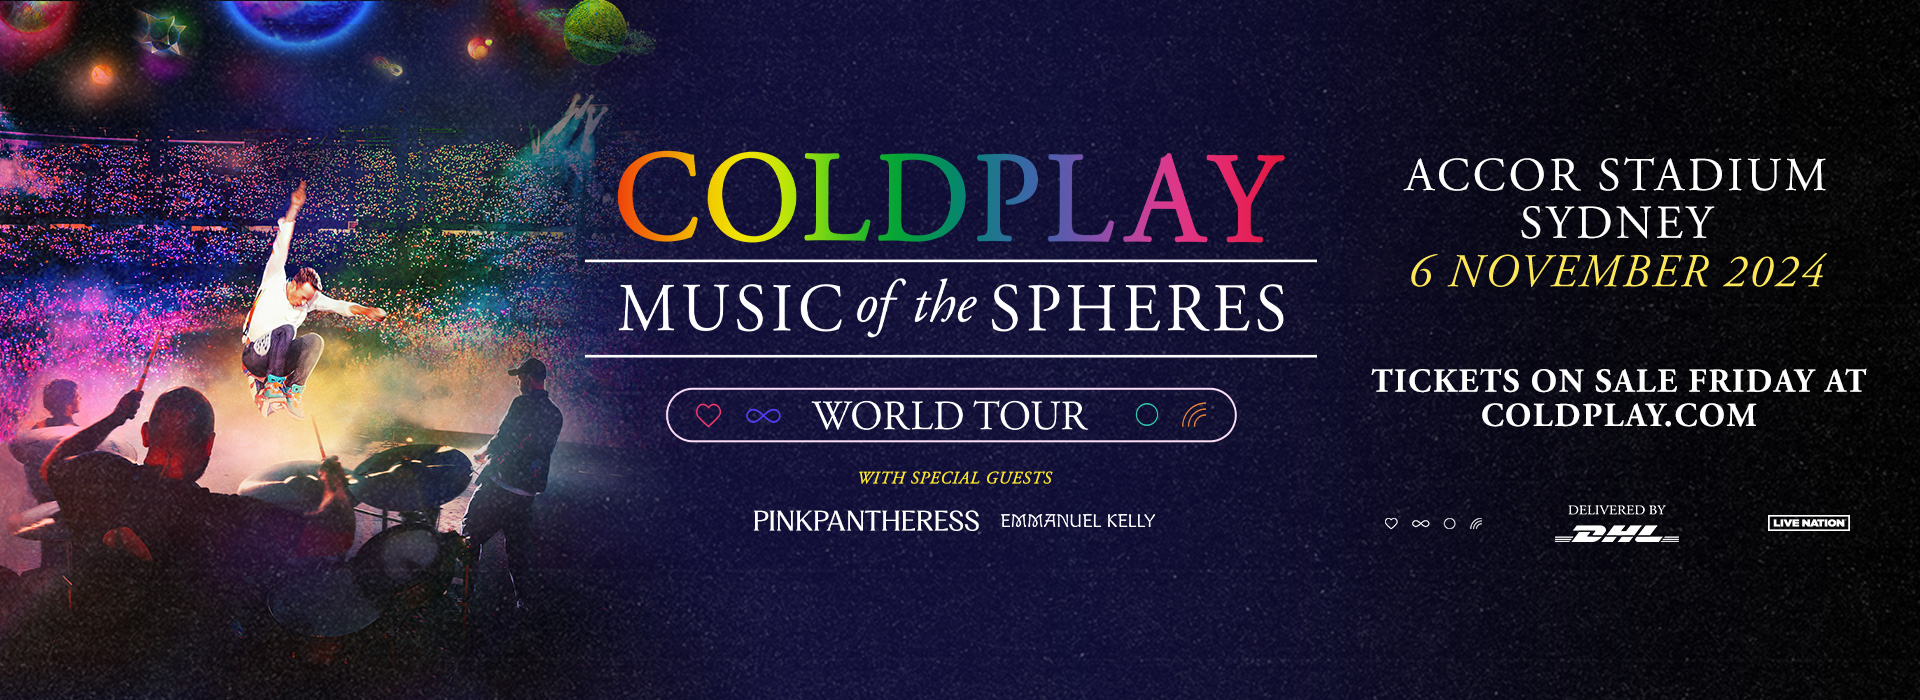 Coldplay Music of the Spheres World Tour at Accor Stadium Sydney